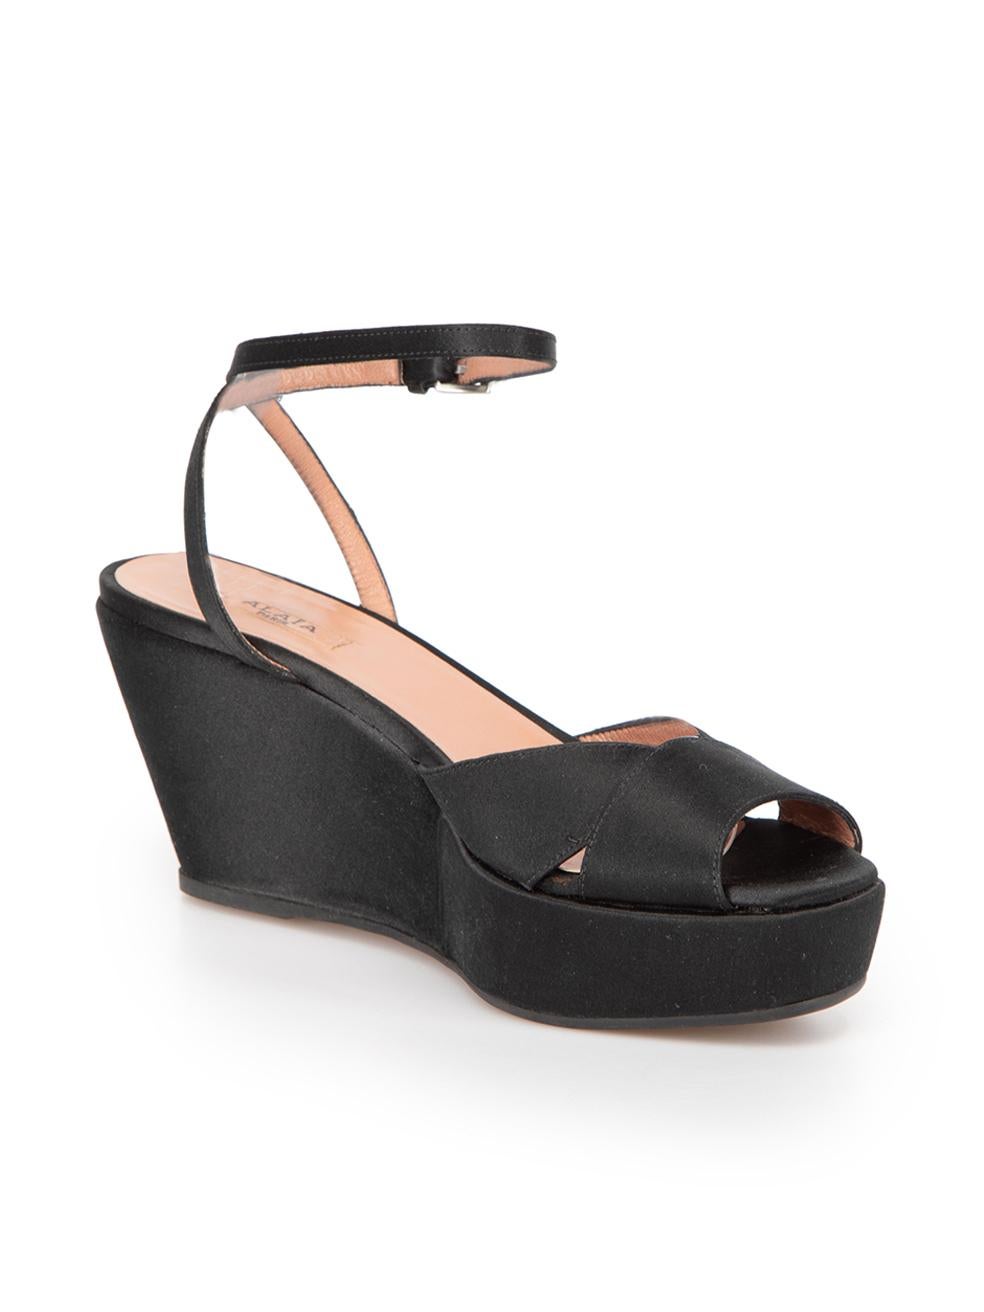 CONDITION is Very good. Minimal wear to shoes is evident. Minimal wear to left and right sides of left shoe with discolouration on this used Alaïa designer resale item. 



Details


Black

Satin

Sandals

Peep square toe

Wedge platform